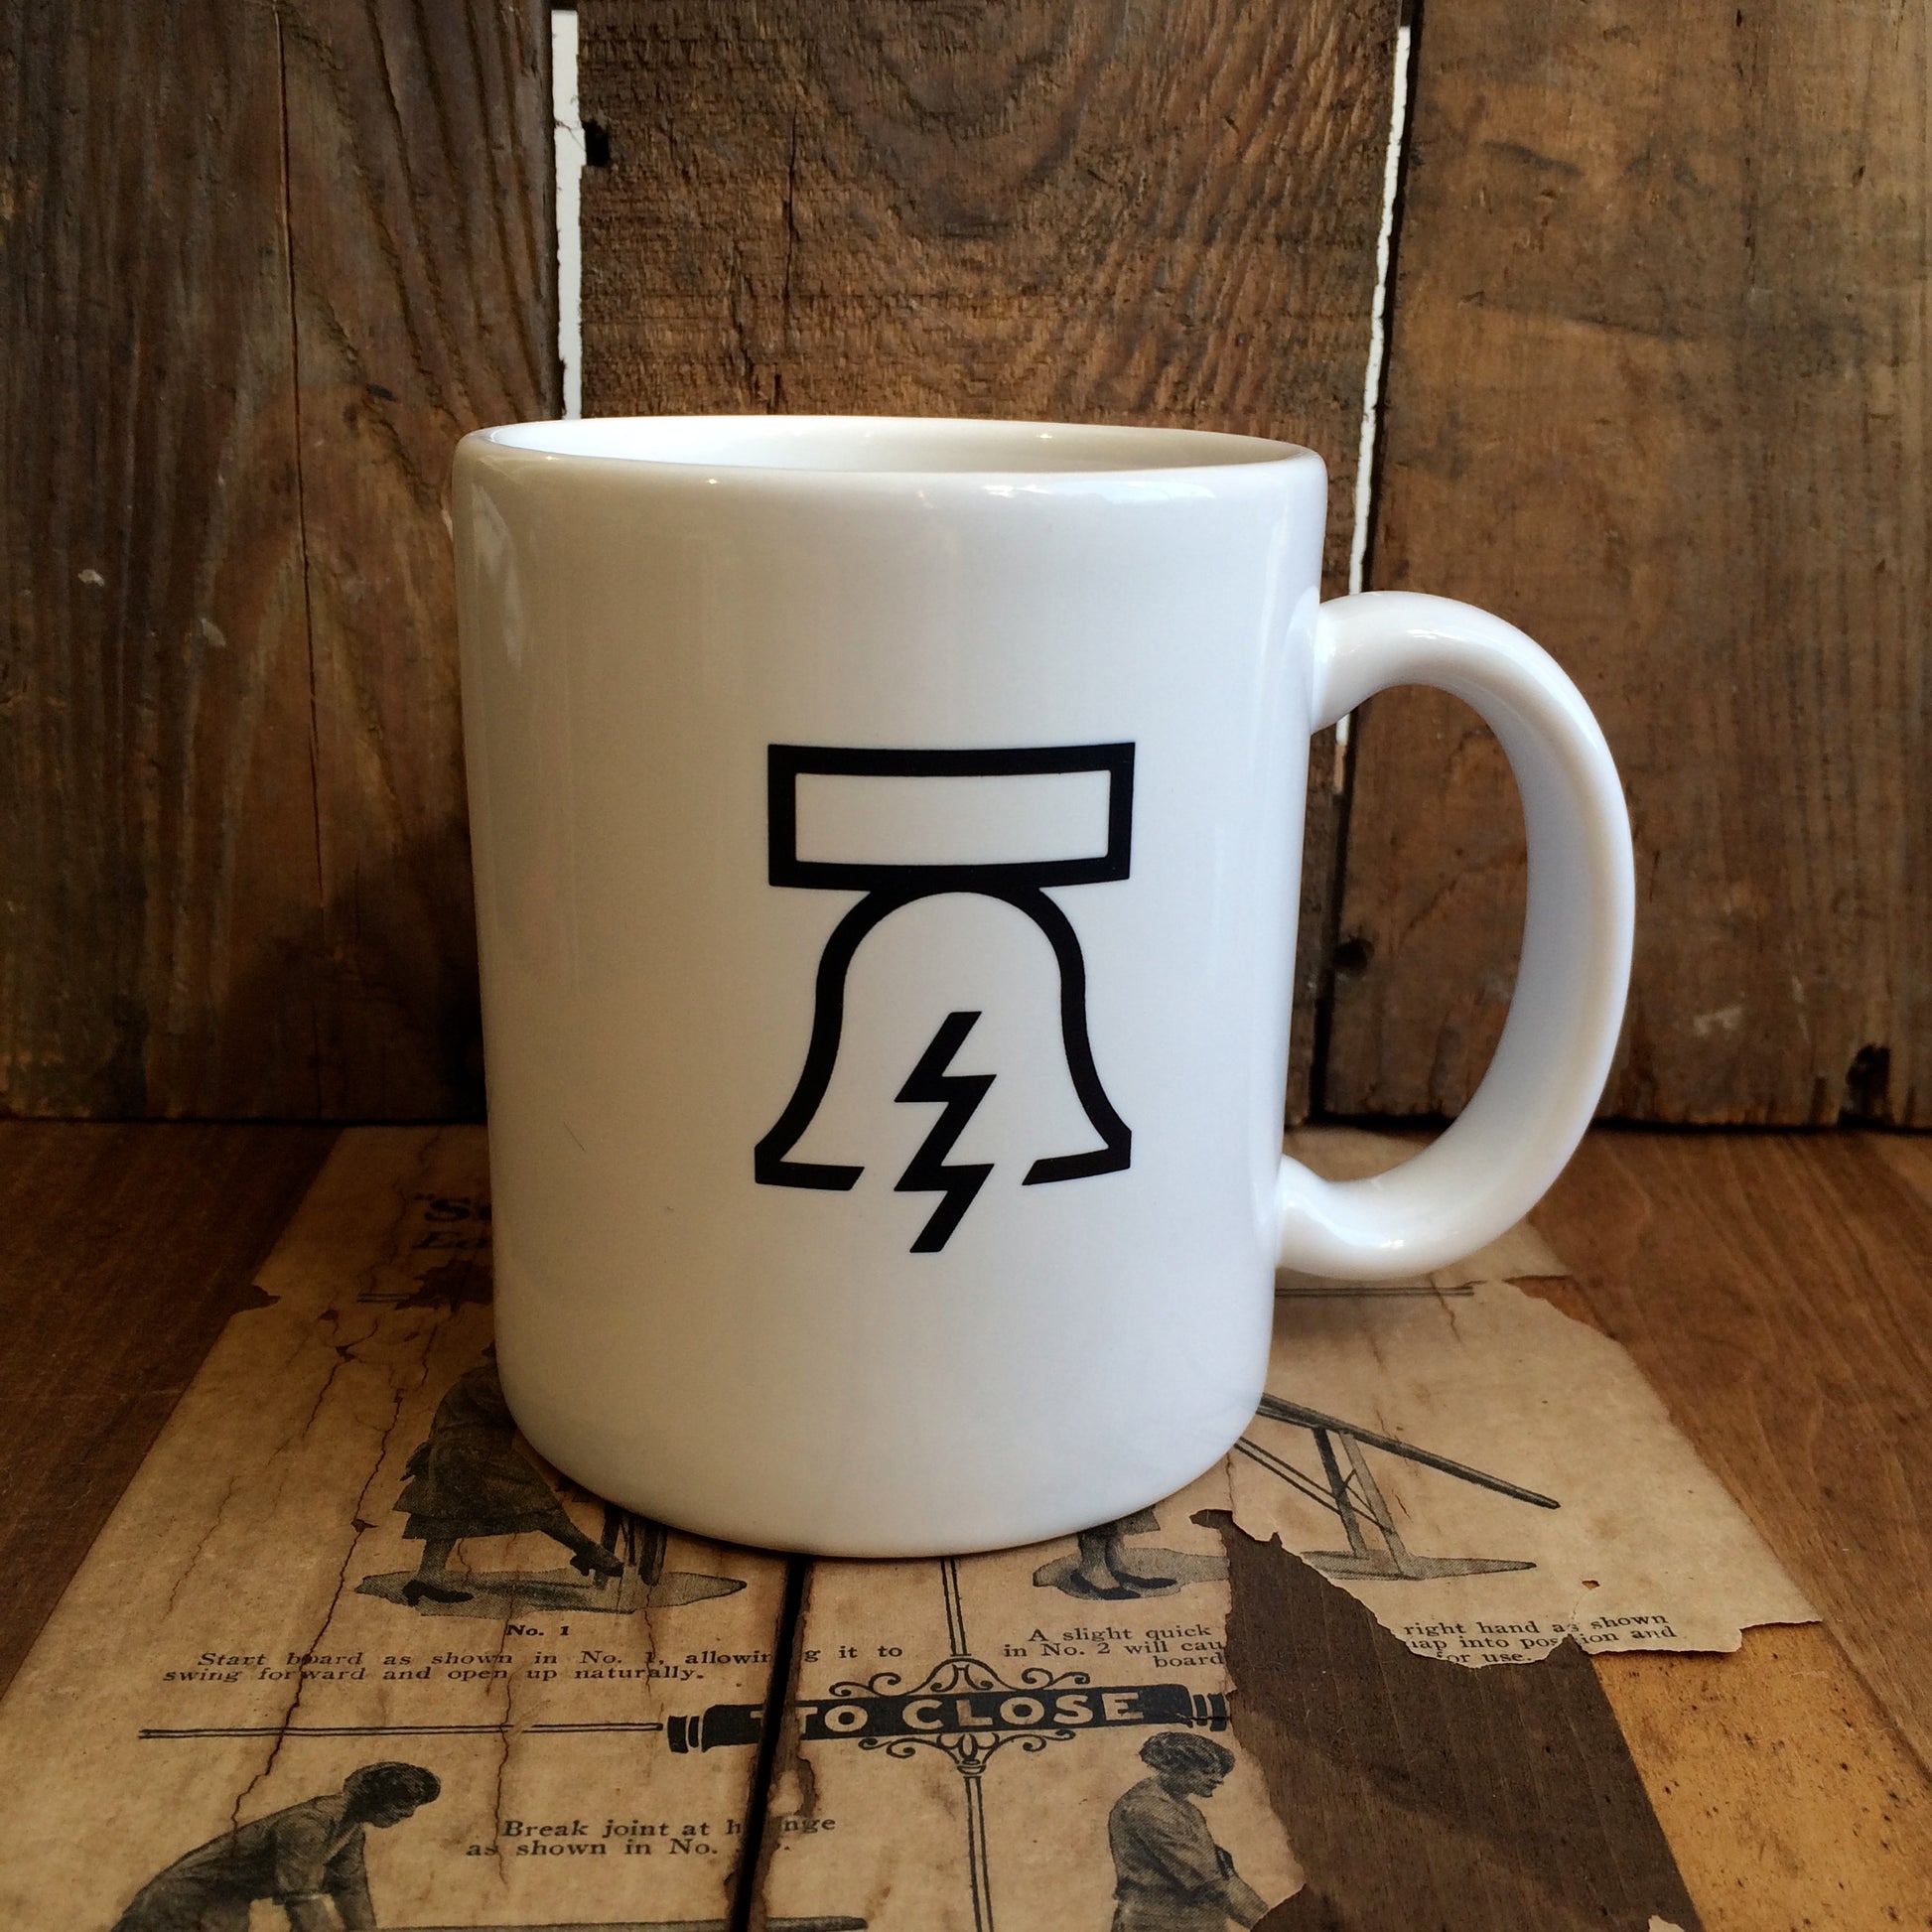 A white Bell & Bolt Mug by Philadelphia Independents featuring a simplistic black design of the iconic bell with a lightning bolt is placed on a wooden surface.